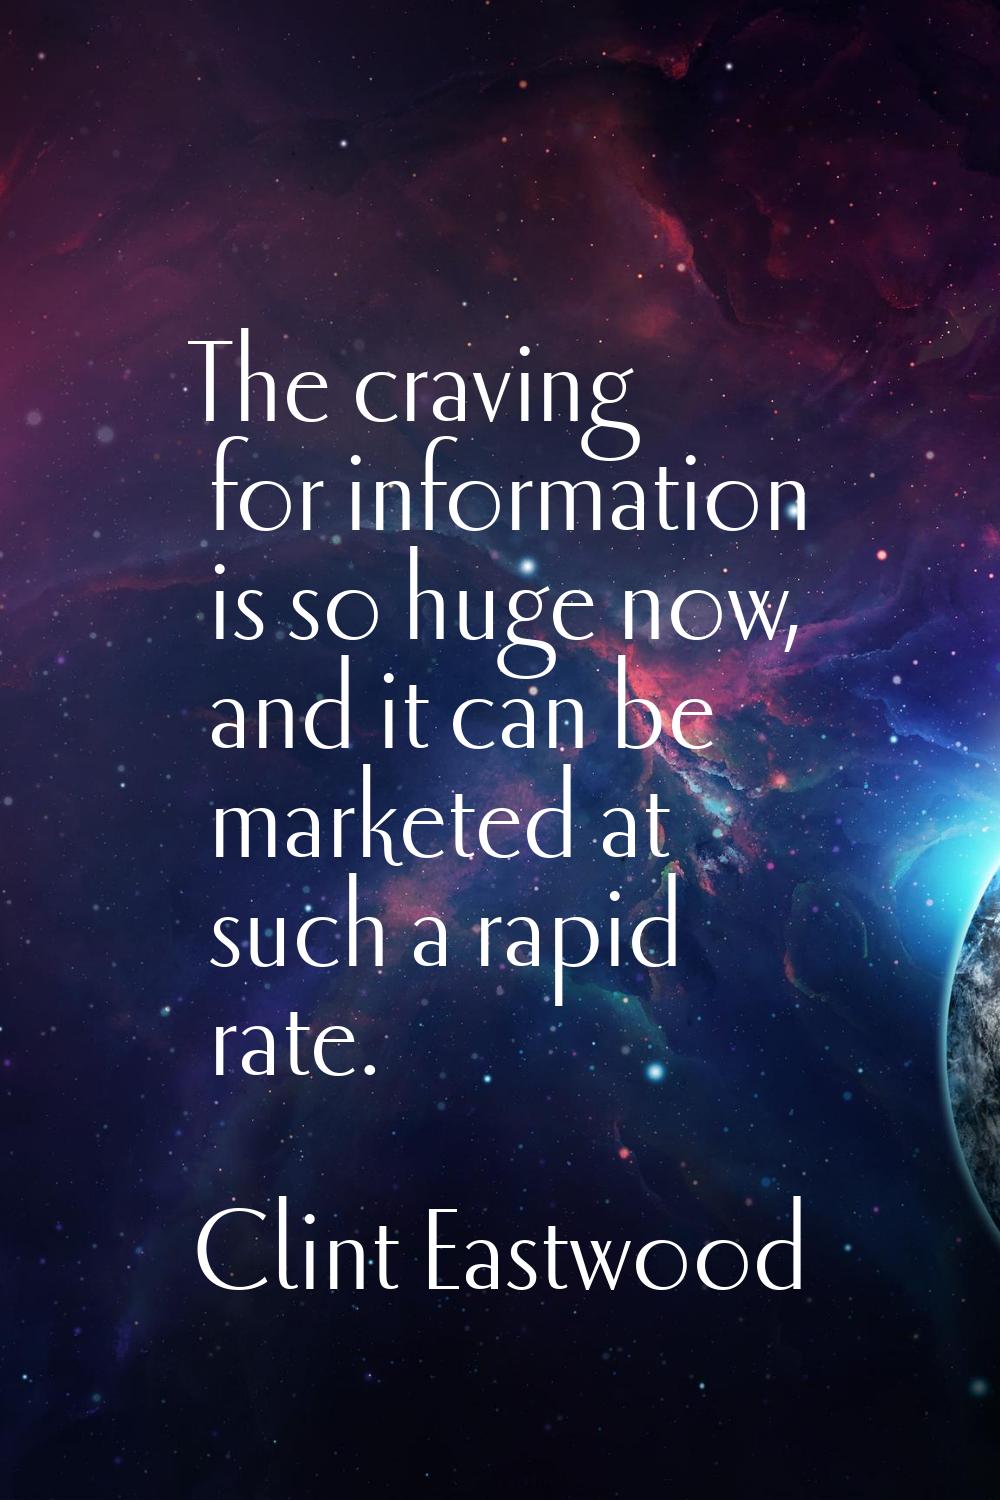 The craving for information is so huge now, and it can be marketed at such a rapid rate.